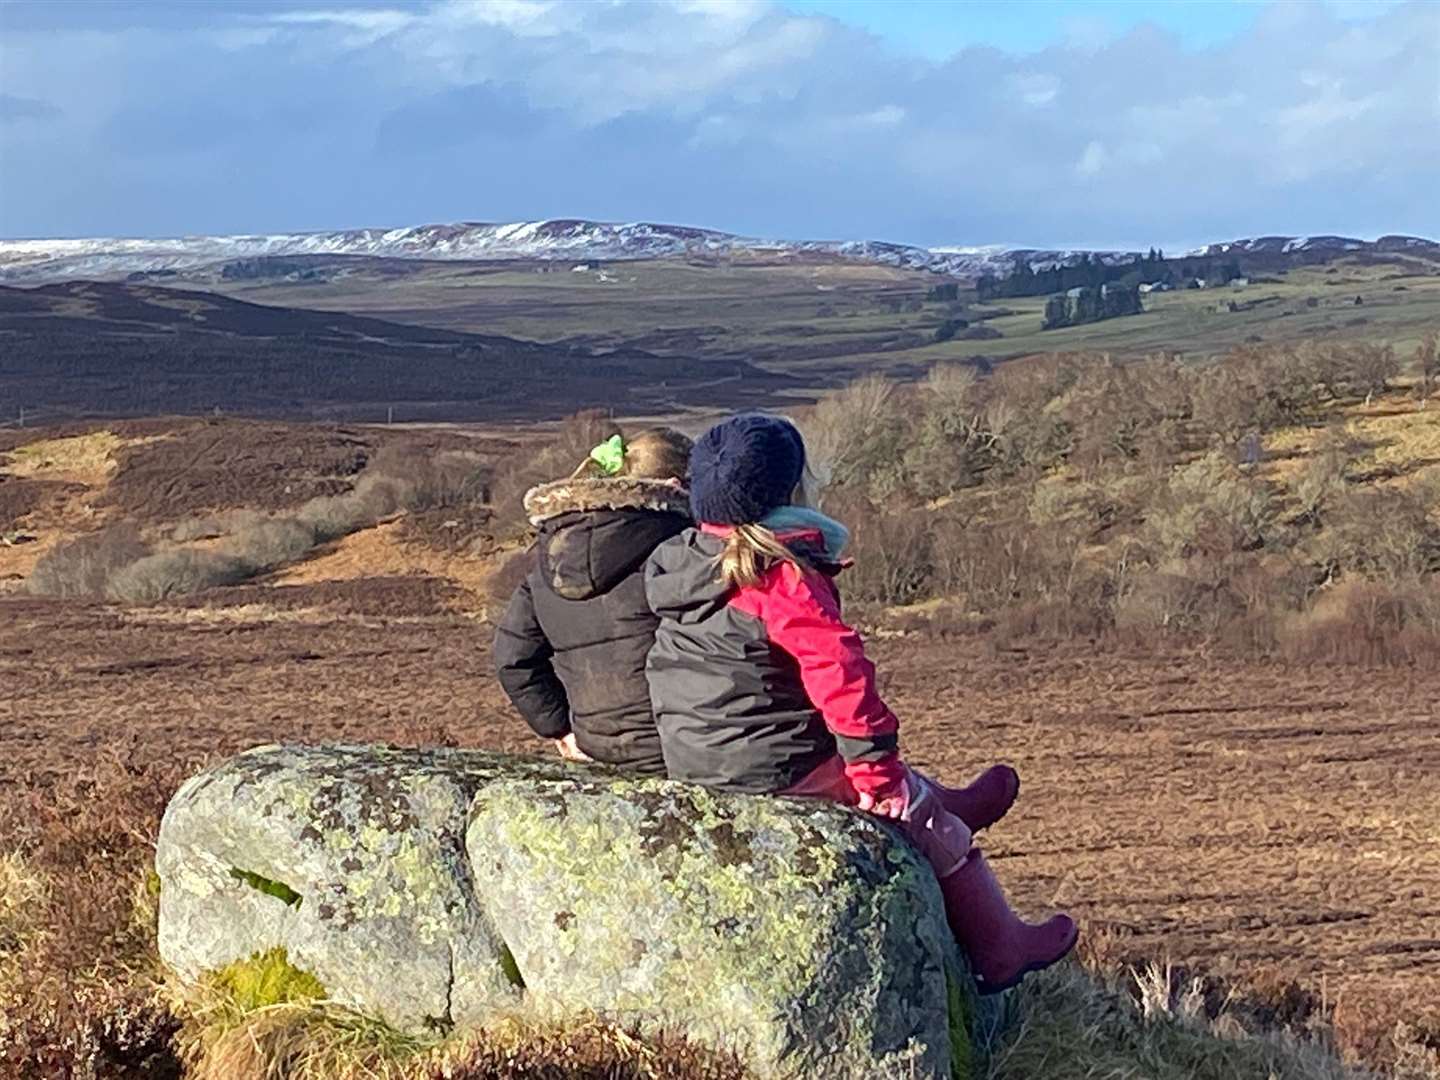 Taya Meldrum-Butcher and Lexi Mackay perch on a rock and enjoy the beautiful view.